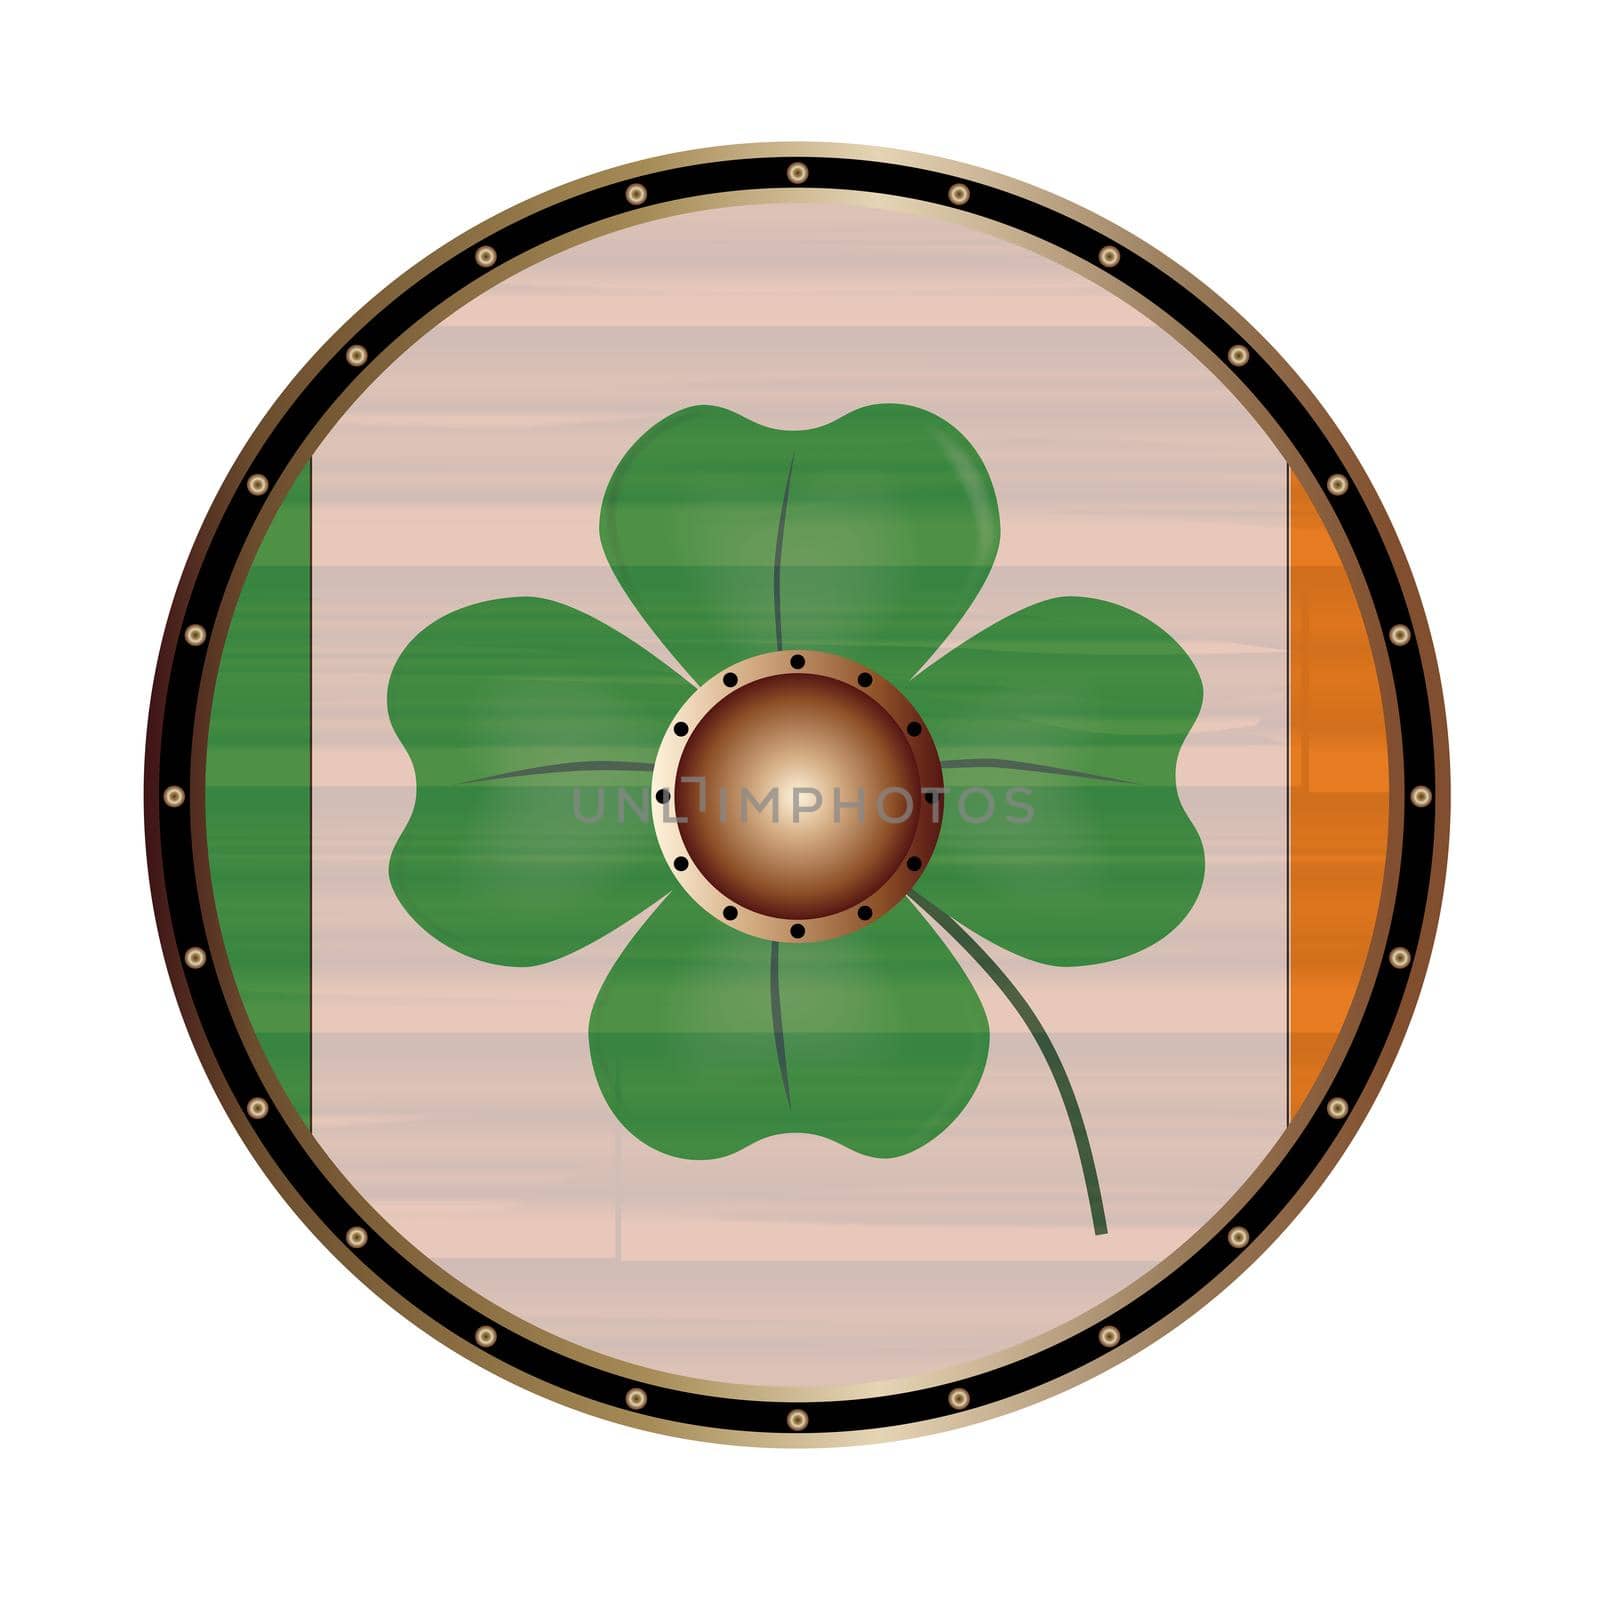 A Viking style round shield with the Irish flag isolated on a white background